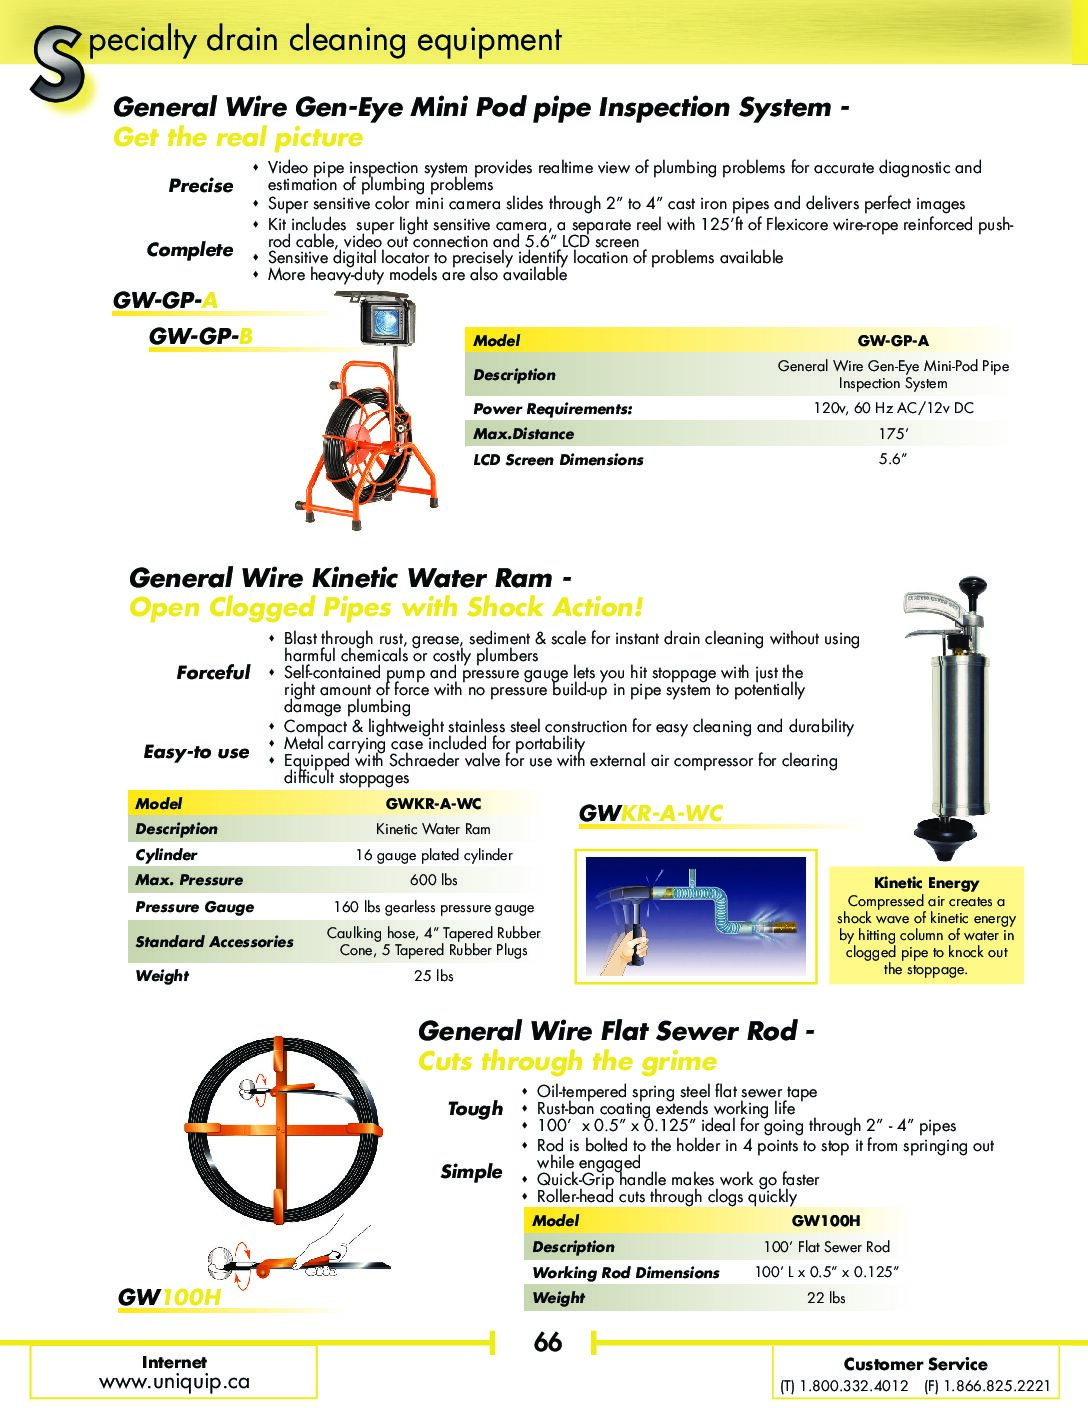 GWKR-A-WC Product Sheet